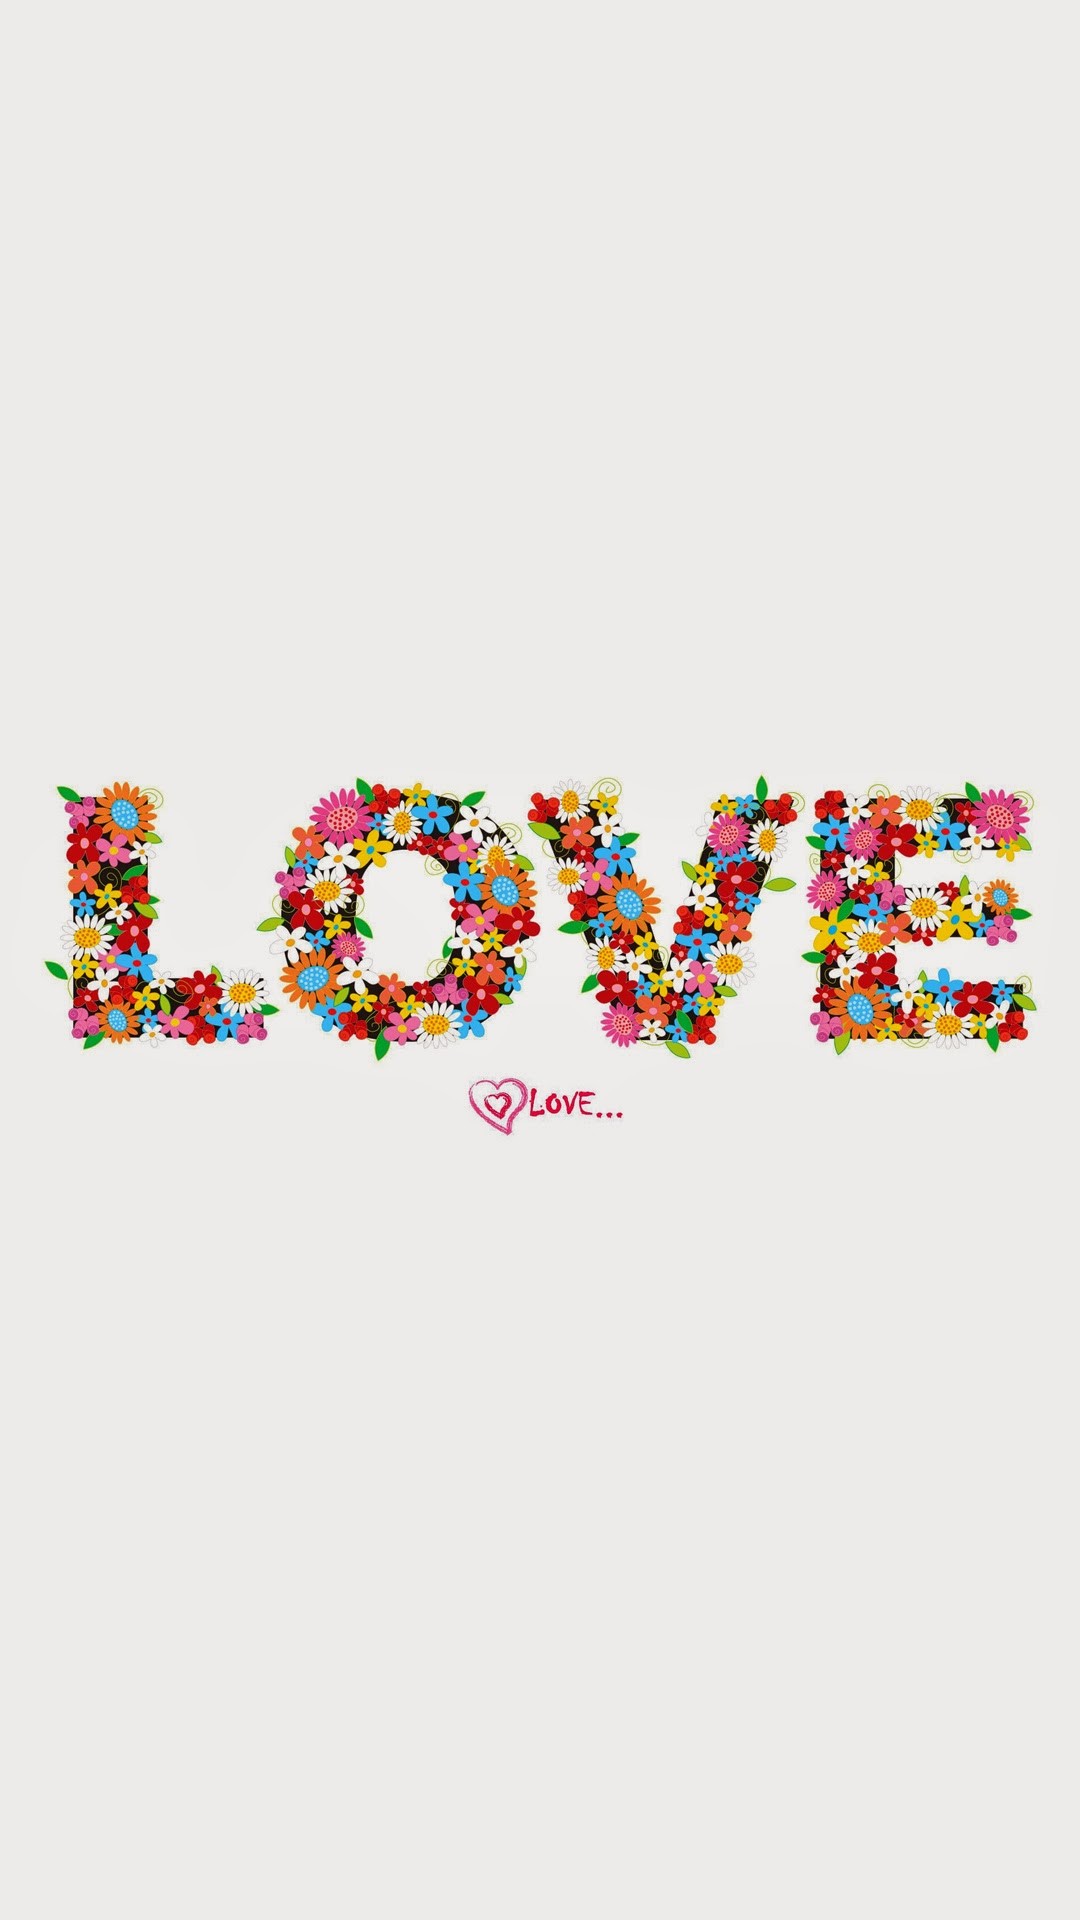 1080x1920 Love Typography Flowers Spring Mobile Wallpaper